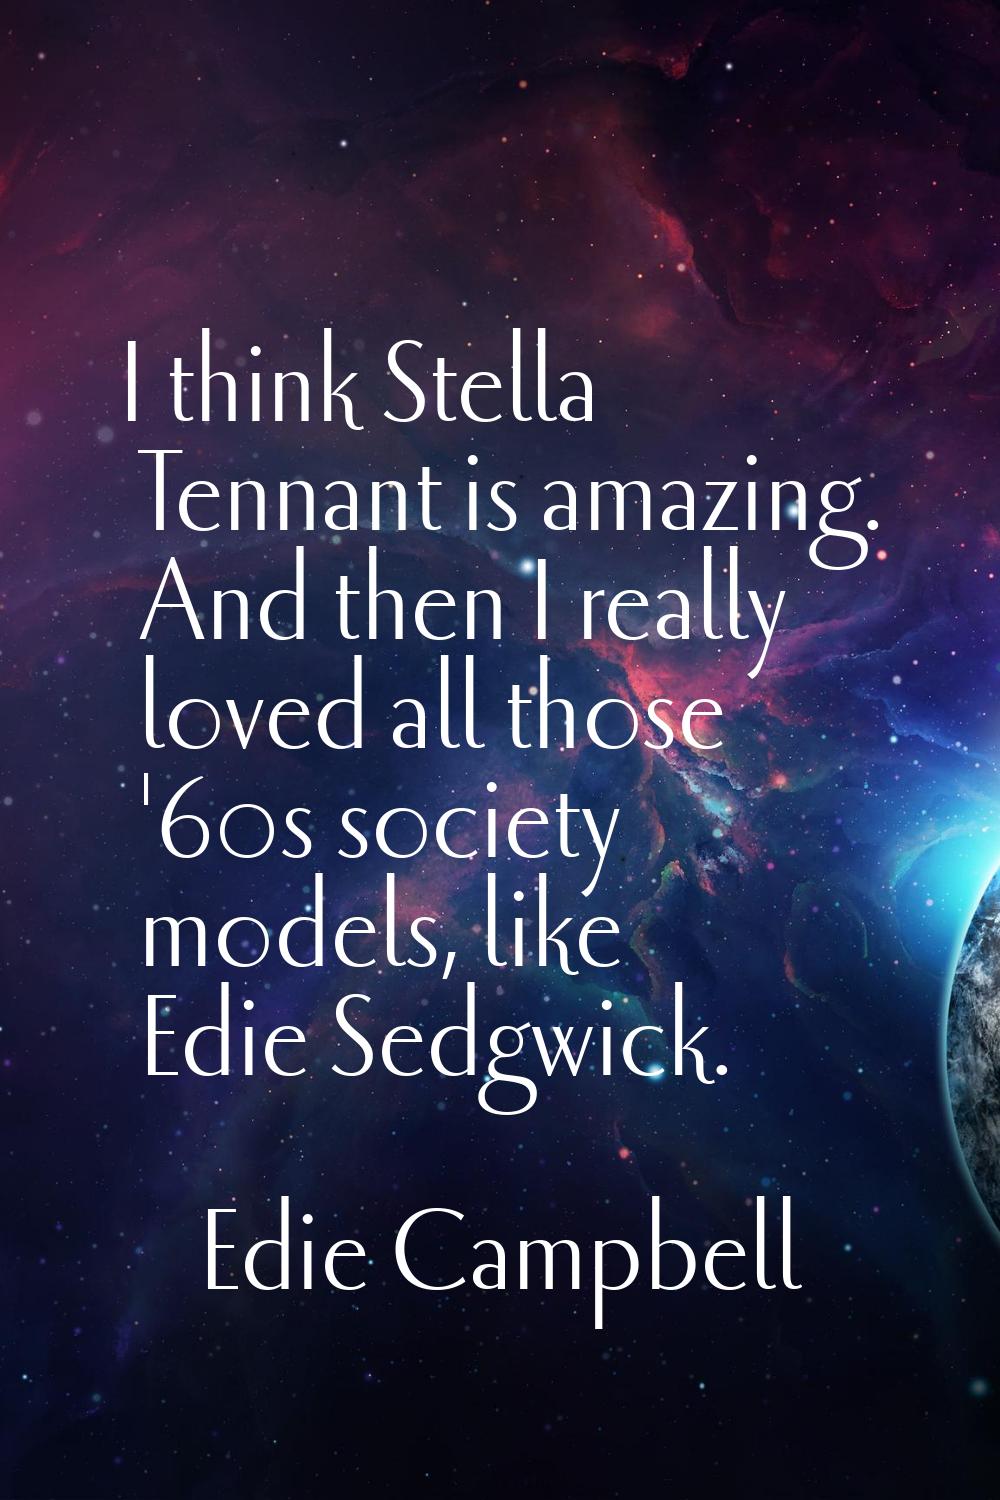 I think Stella Tennant is amazing. And then I really loved all those '60s society models, like Edie